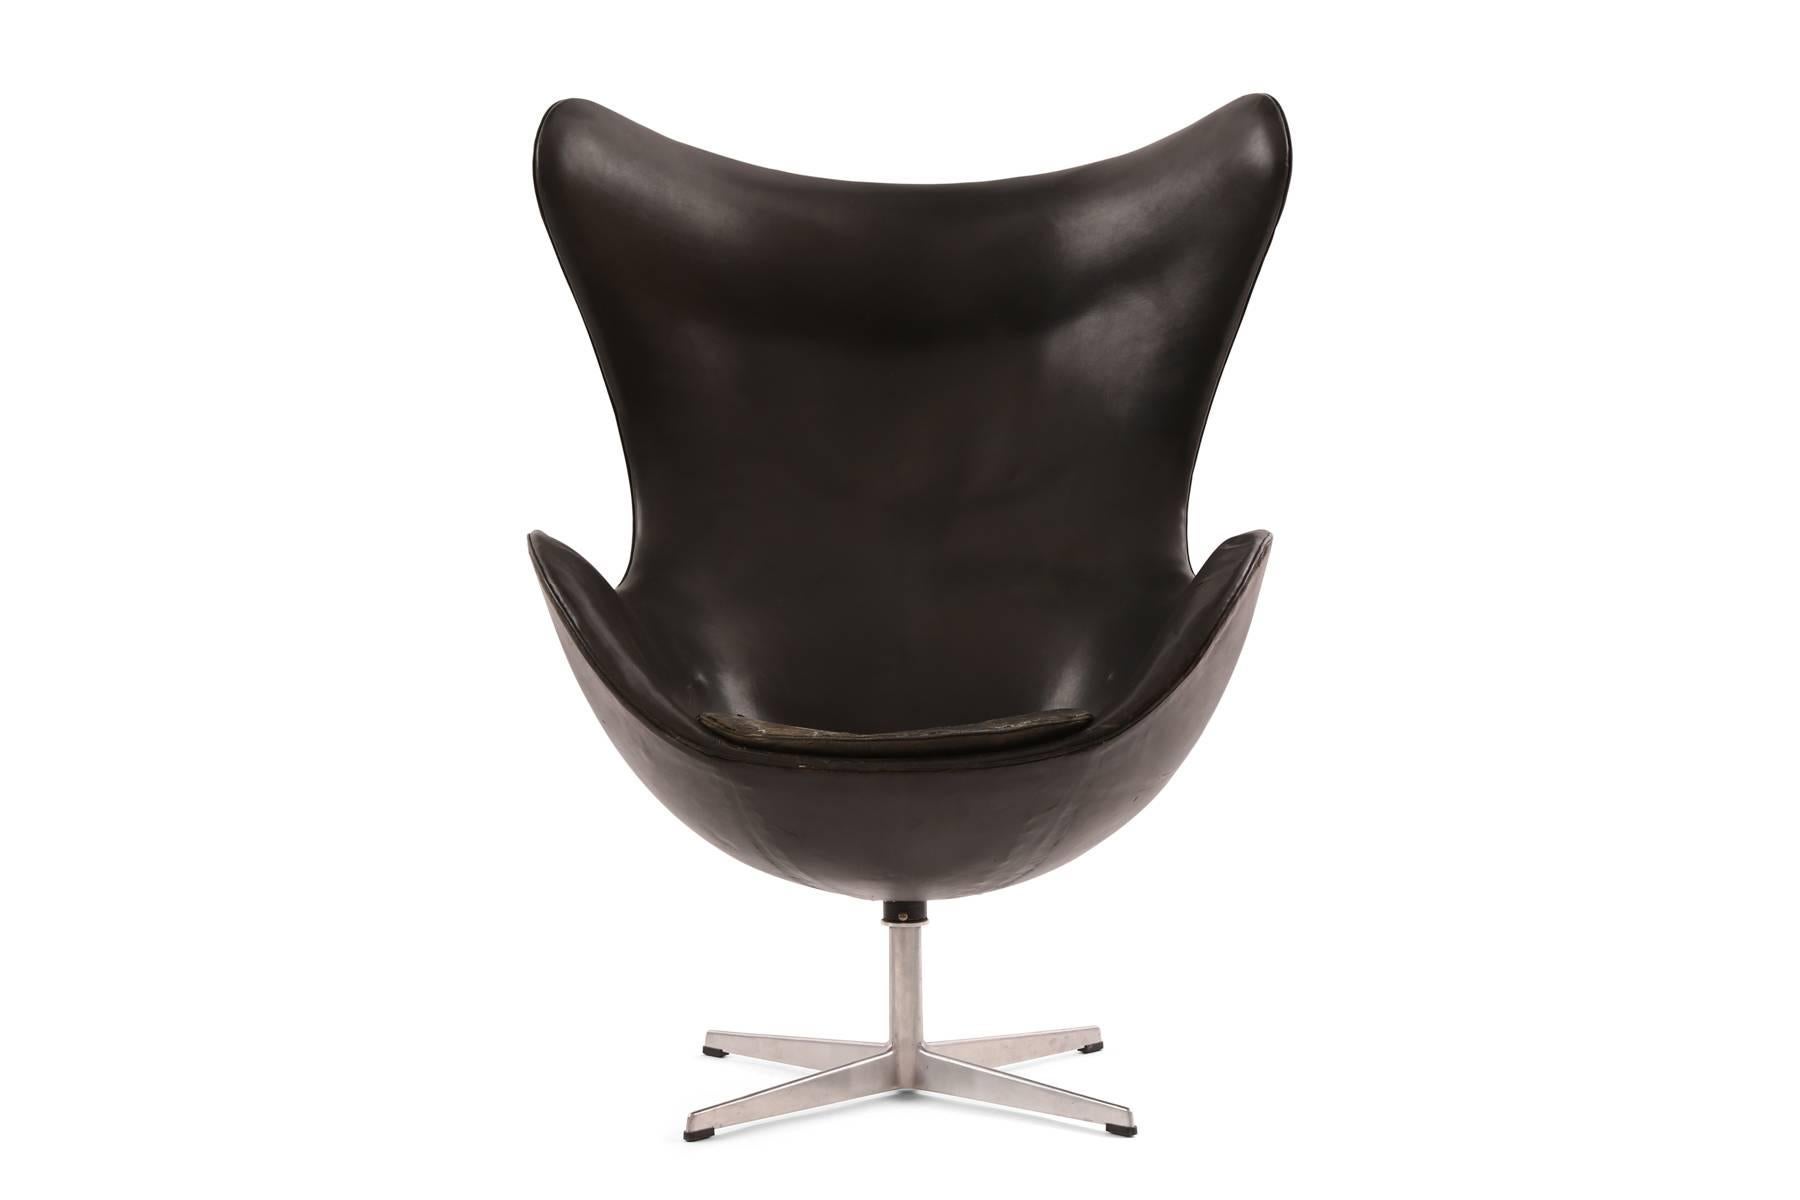 Arne Jacobsen for Fritz Hansen first generation leather egg chair, circa late 1950s. This example has beautifully patinated black leather black leather upholstery and can be used with or without the seat cushion. Has some internal drying to the foam